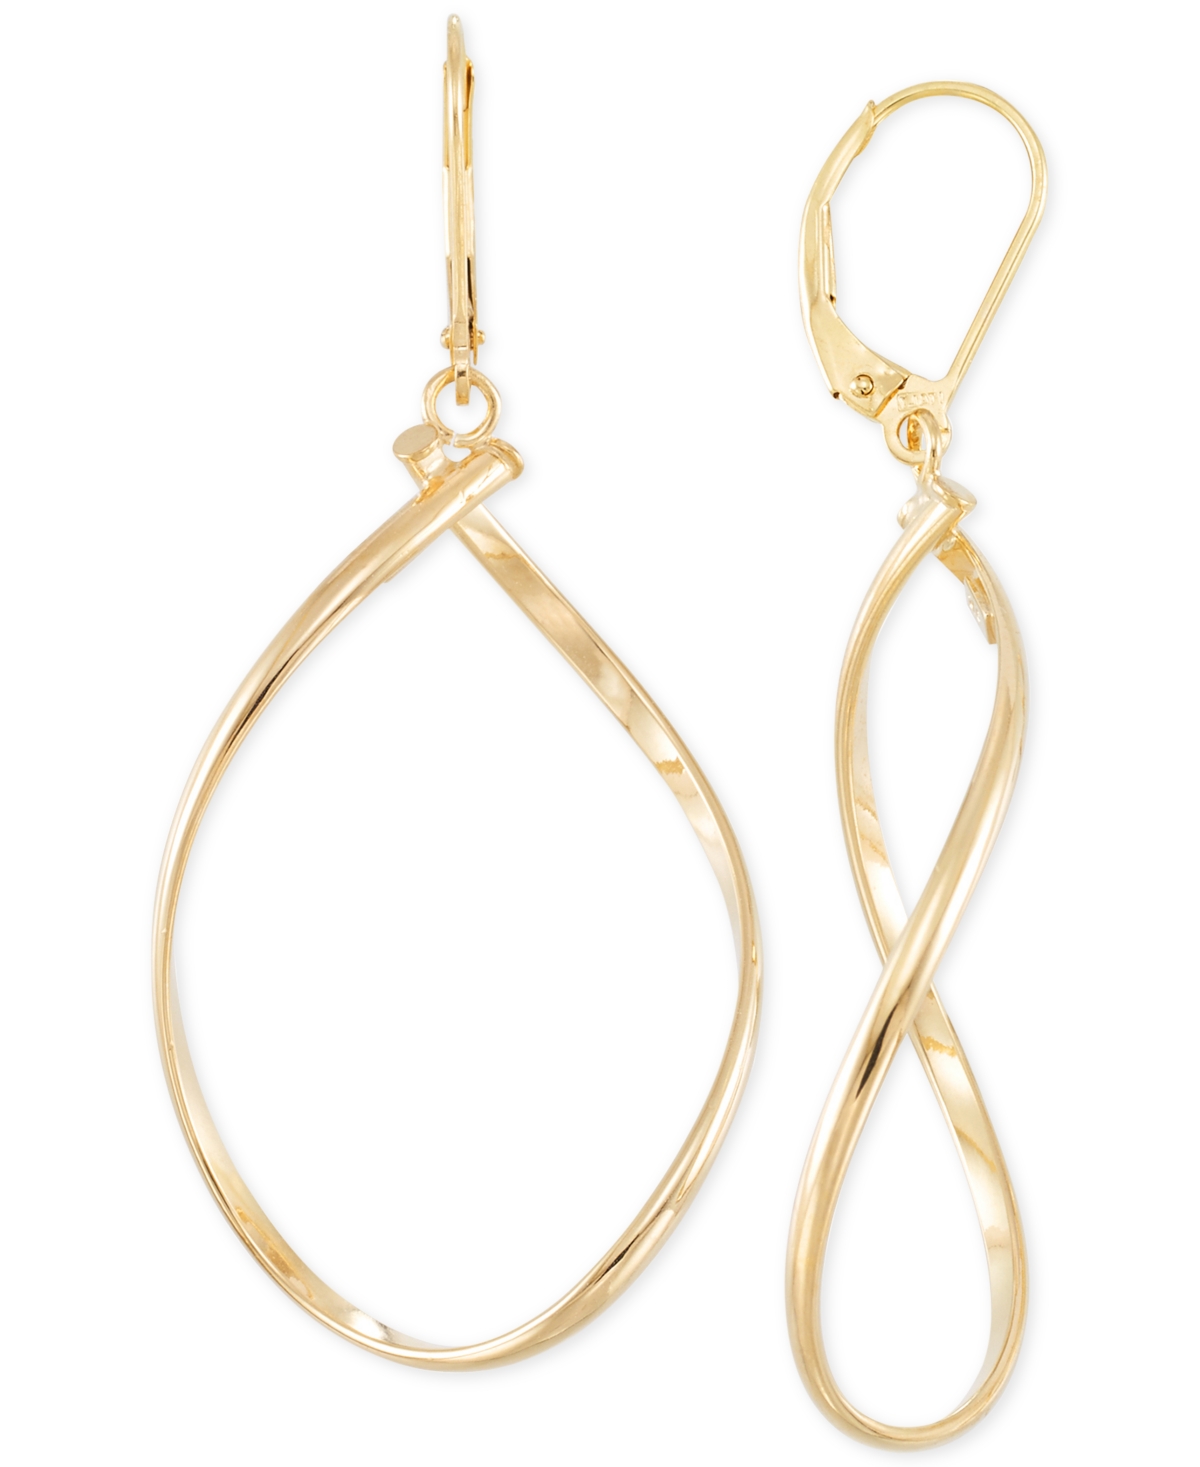 Polished Twist Illusion Drop Earrings in 14k Gold - Yellow Gold